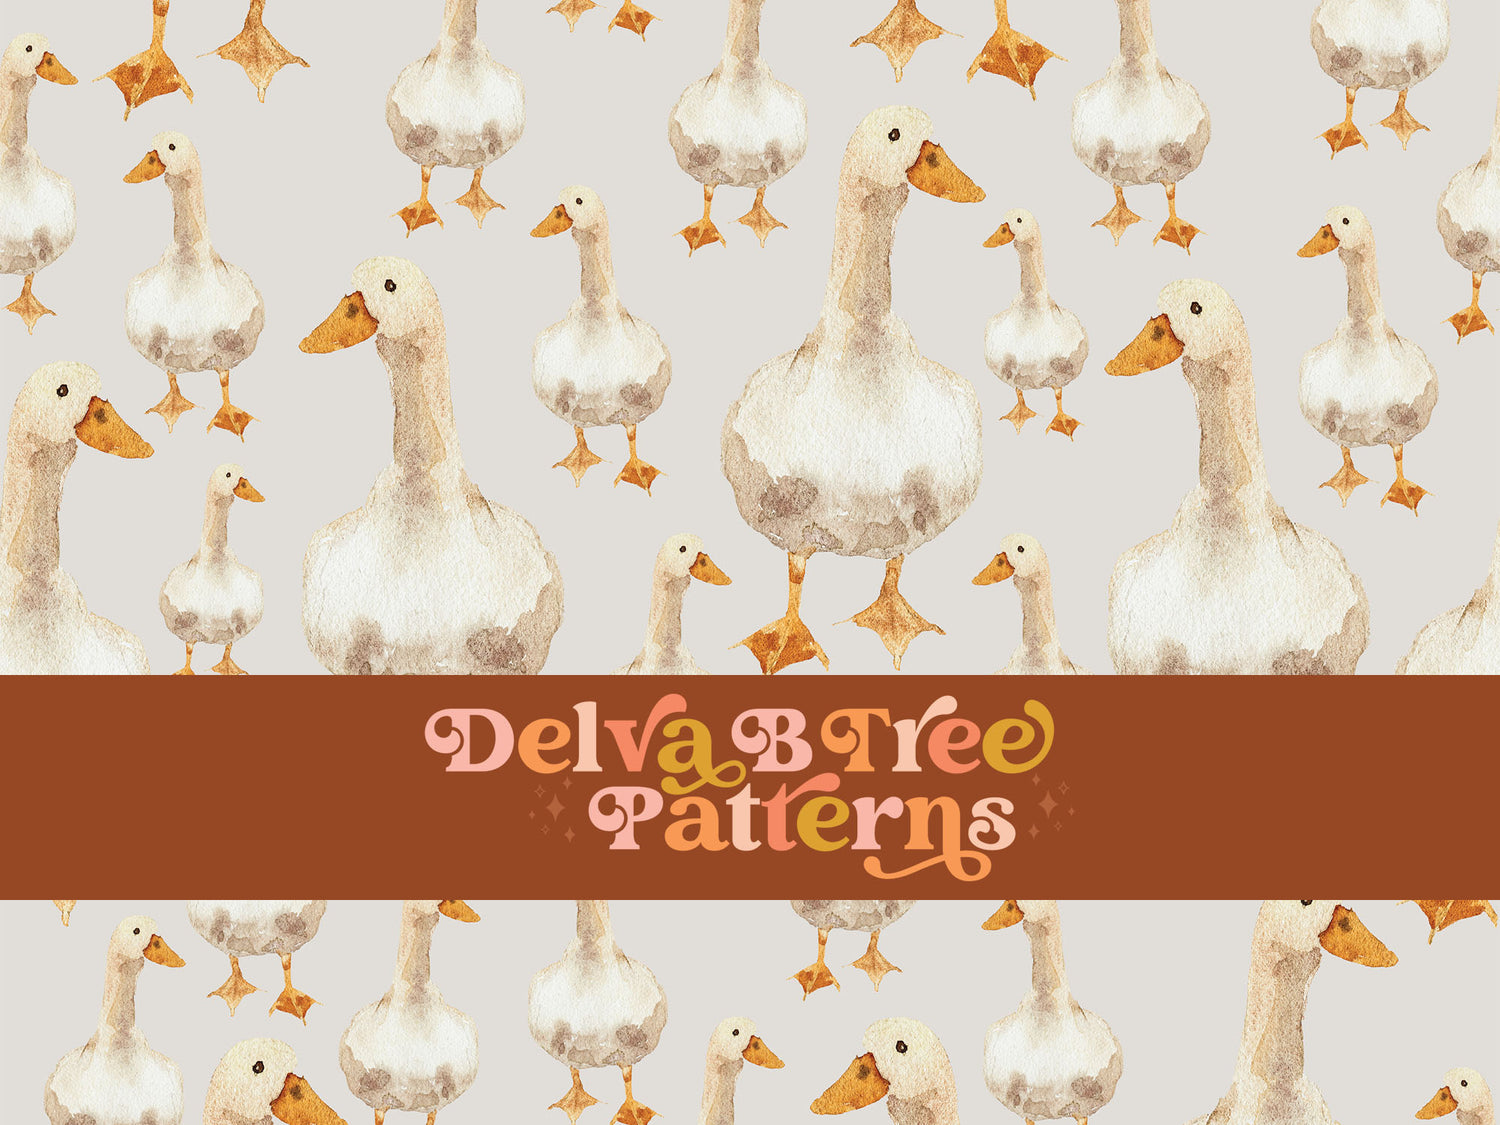 Watercolor geese on a pale gray background seamless file for fabric printing. Gender Neutral retro looking goose repeat pattern for textiles, polymailers, baby boy lovey blankets, nursery crib bedding, kids clothing, girls hair accessories, home decor accents, pet products.